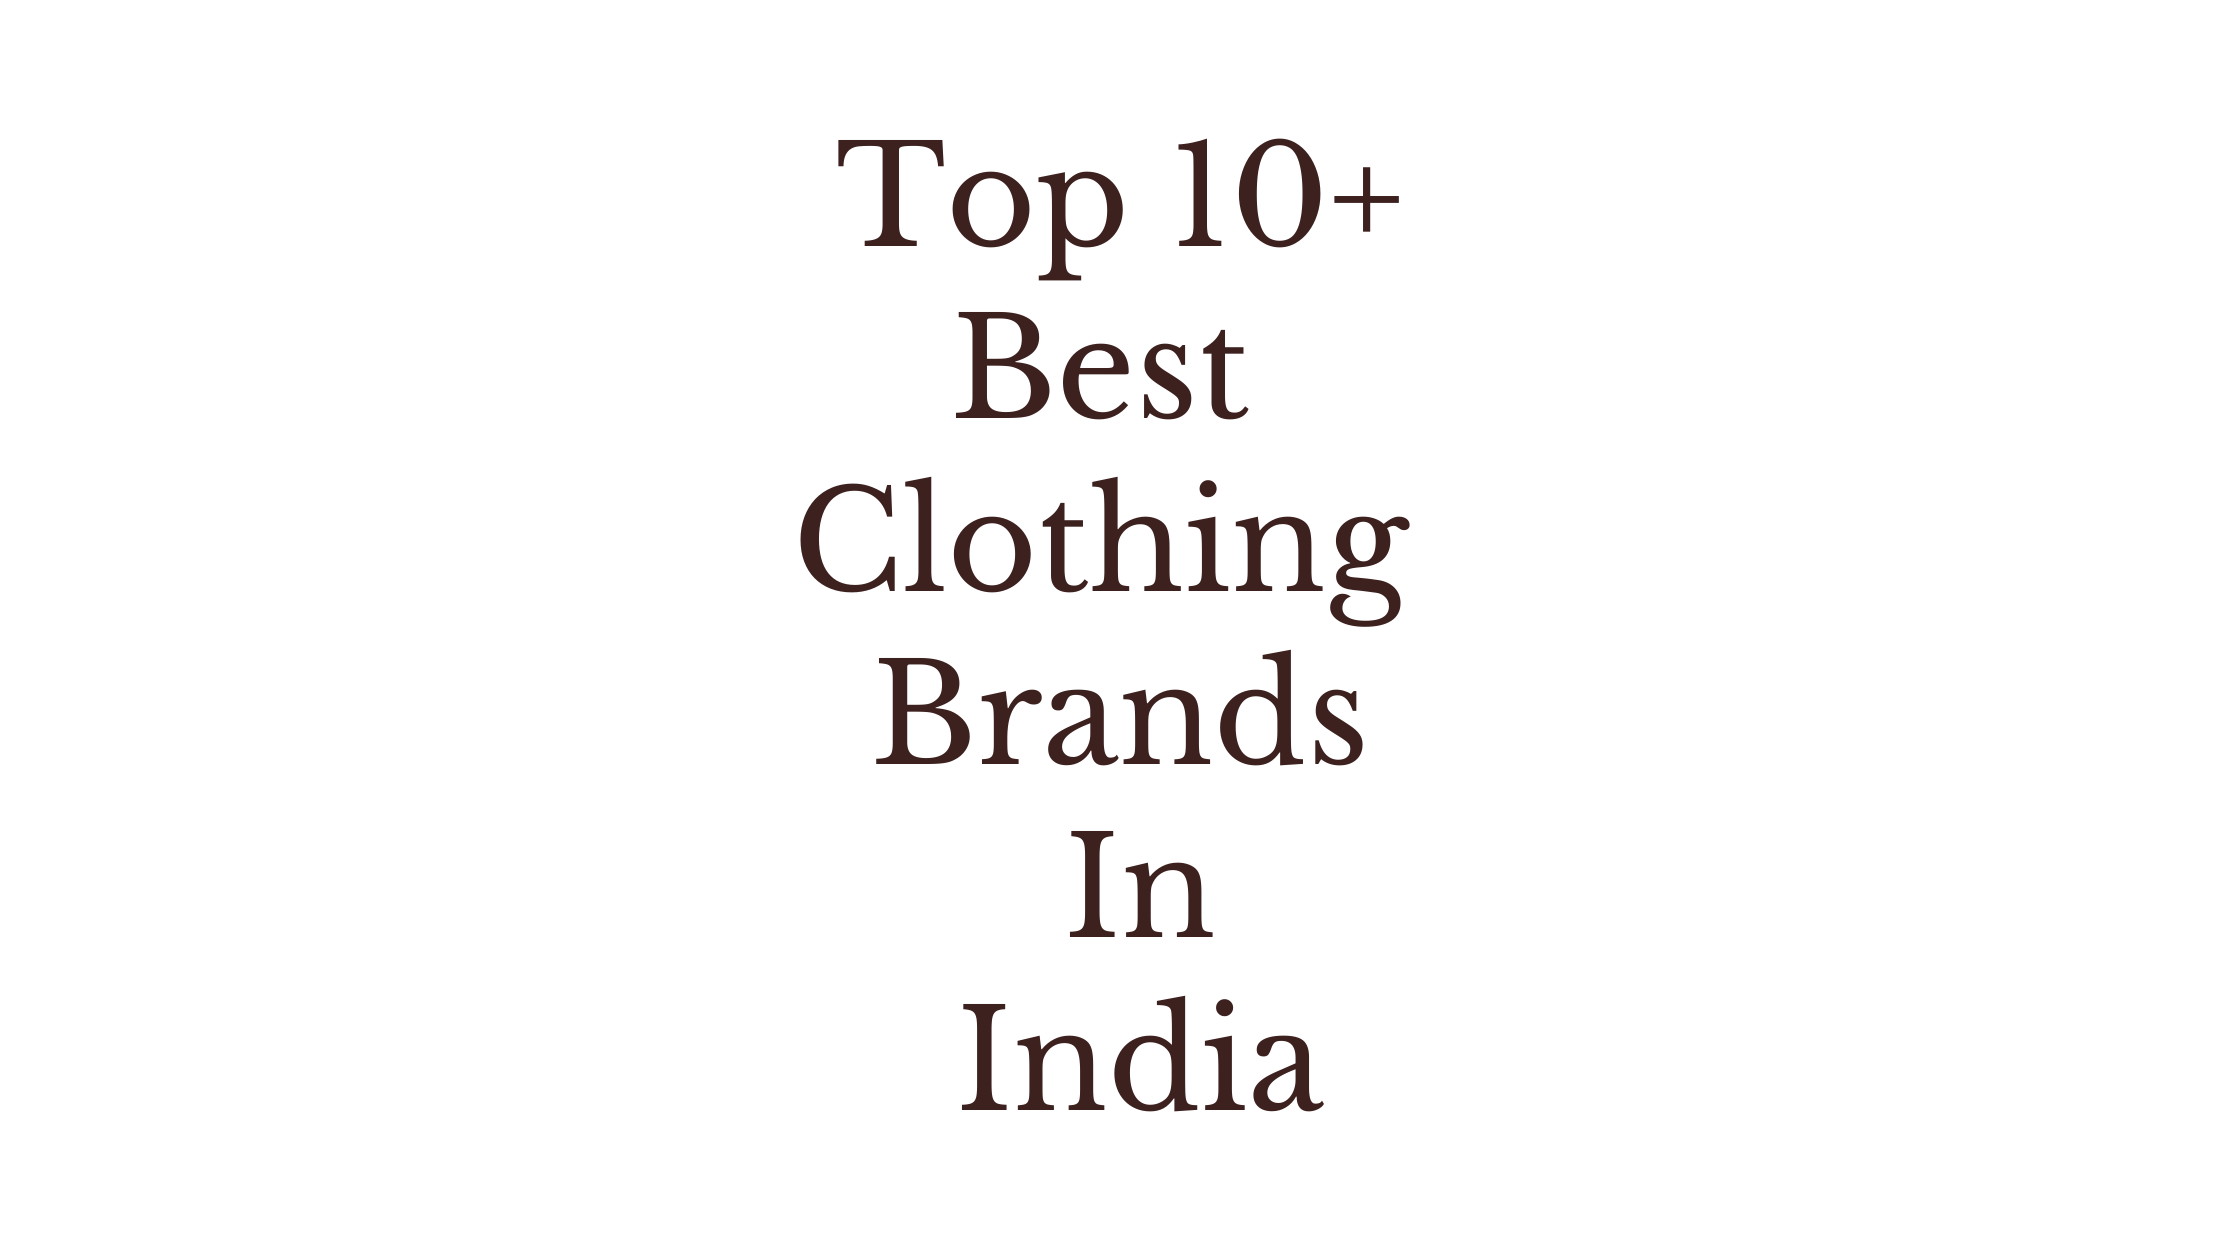 Top 10+ Best Clothing Brands In India